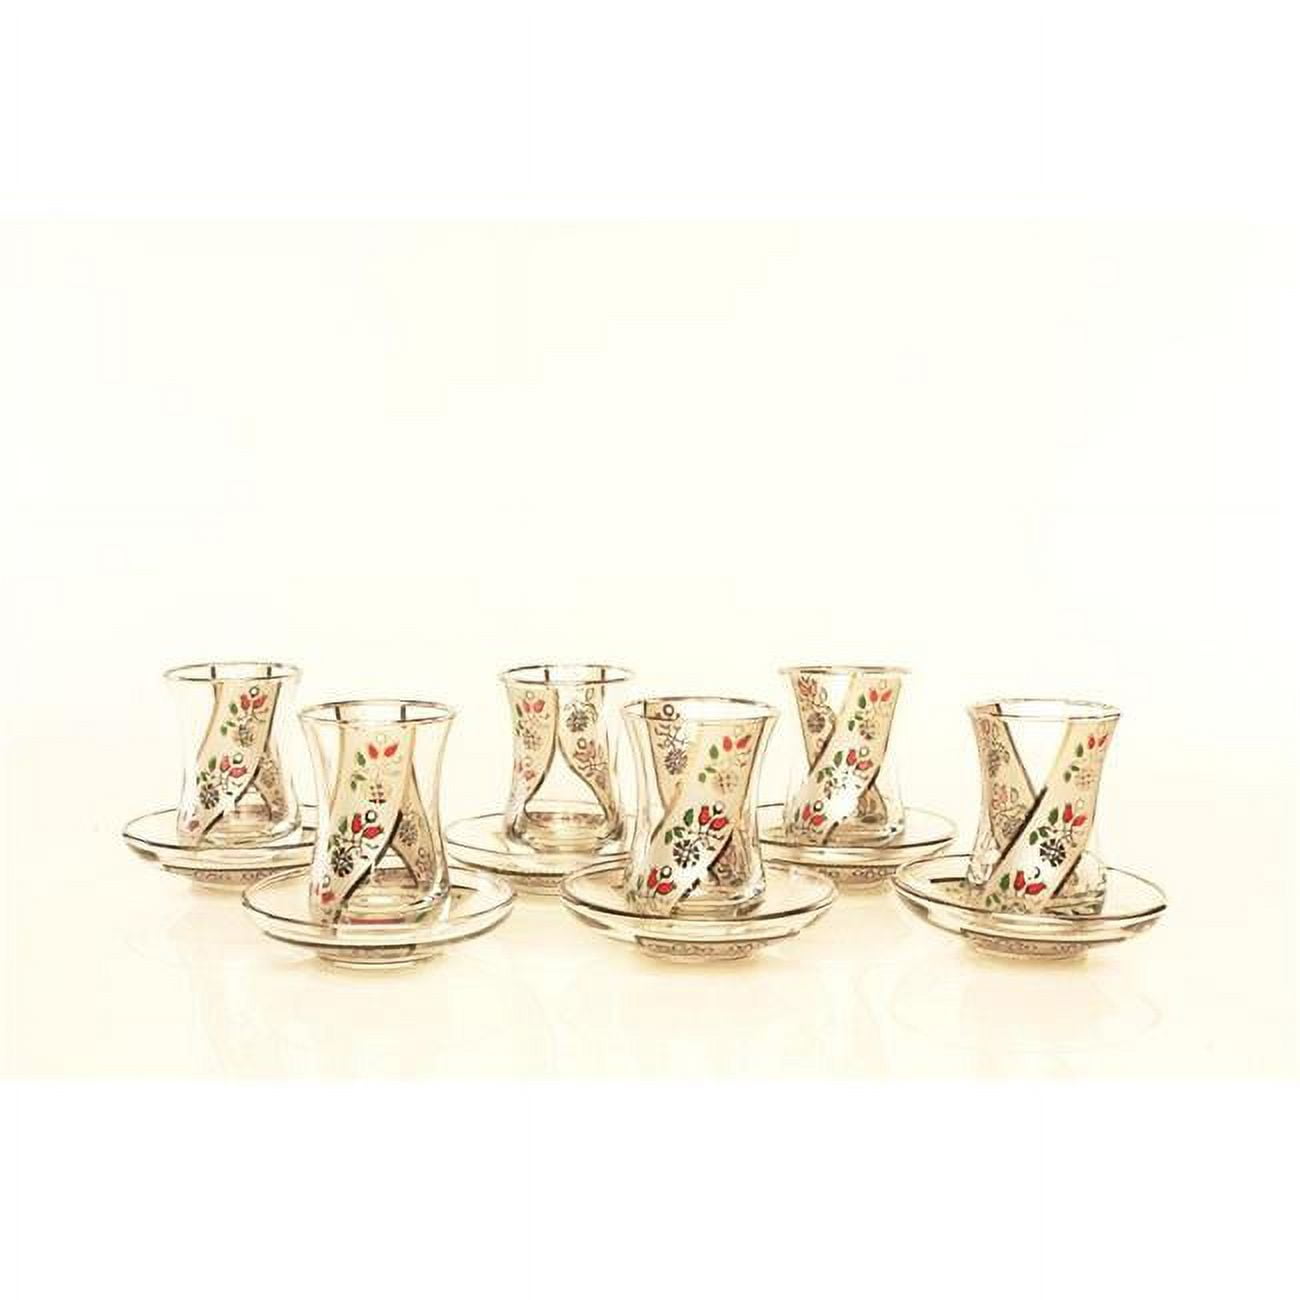 Classic Touch Cat672s Tea Cup With Silver Design, Set Of 6